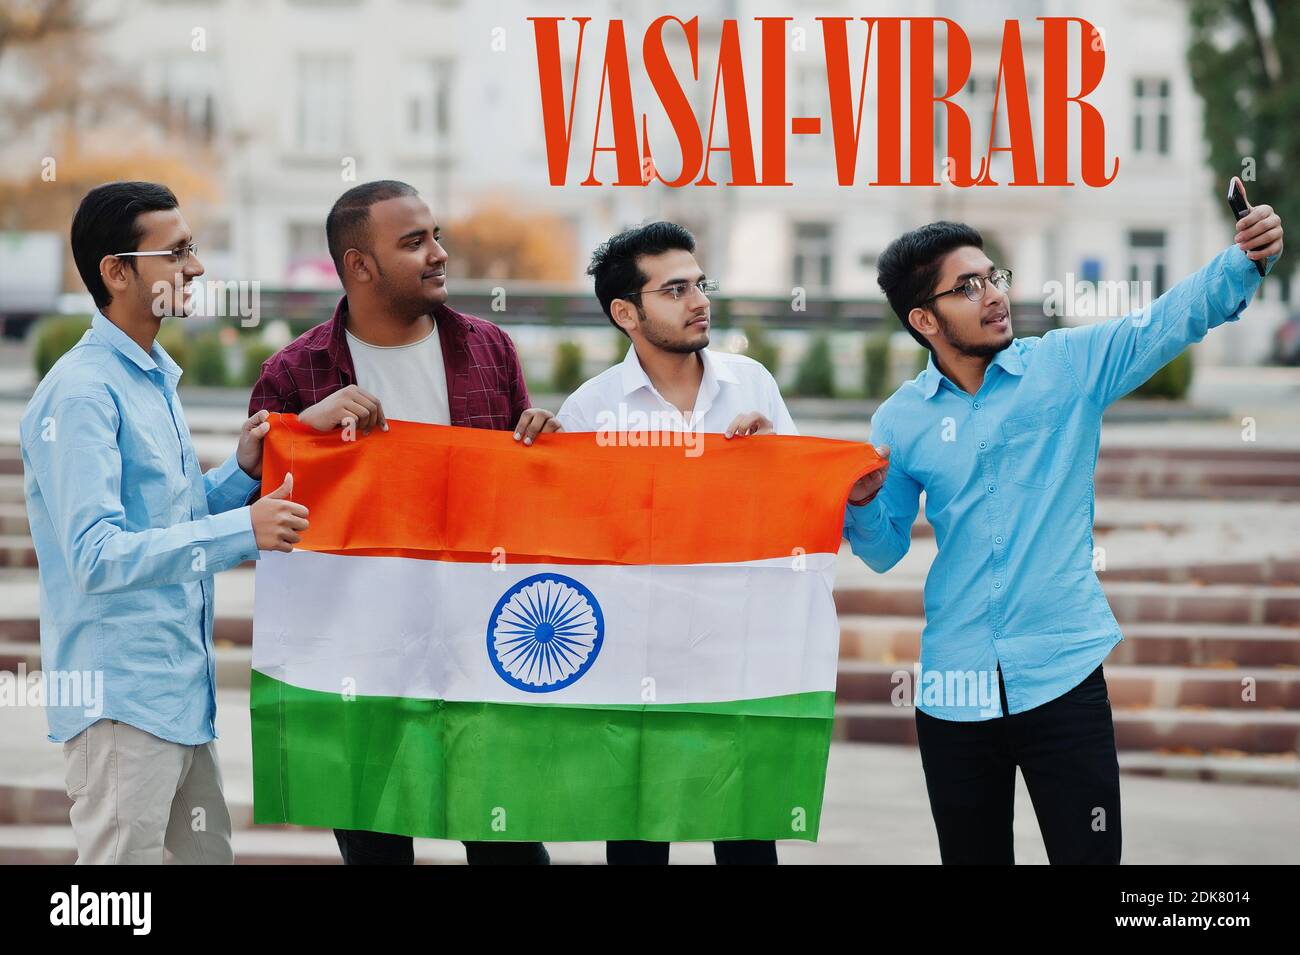 https://c8.alamy.com/comp/2DK8014/vasai-virar-city-inscription-group-of-four-indian-male-friends-with-india-flag-making-selfie-on-mobile-phone-largest-india-cities-concept-2DK8014.jpg